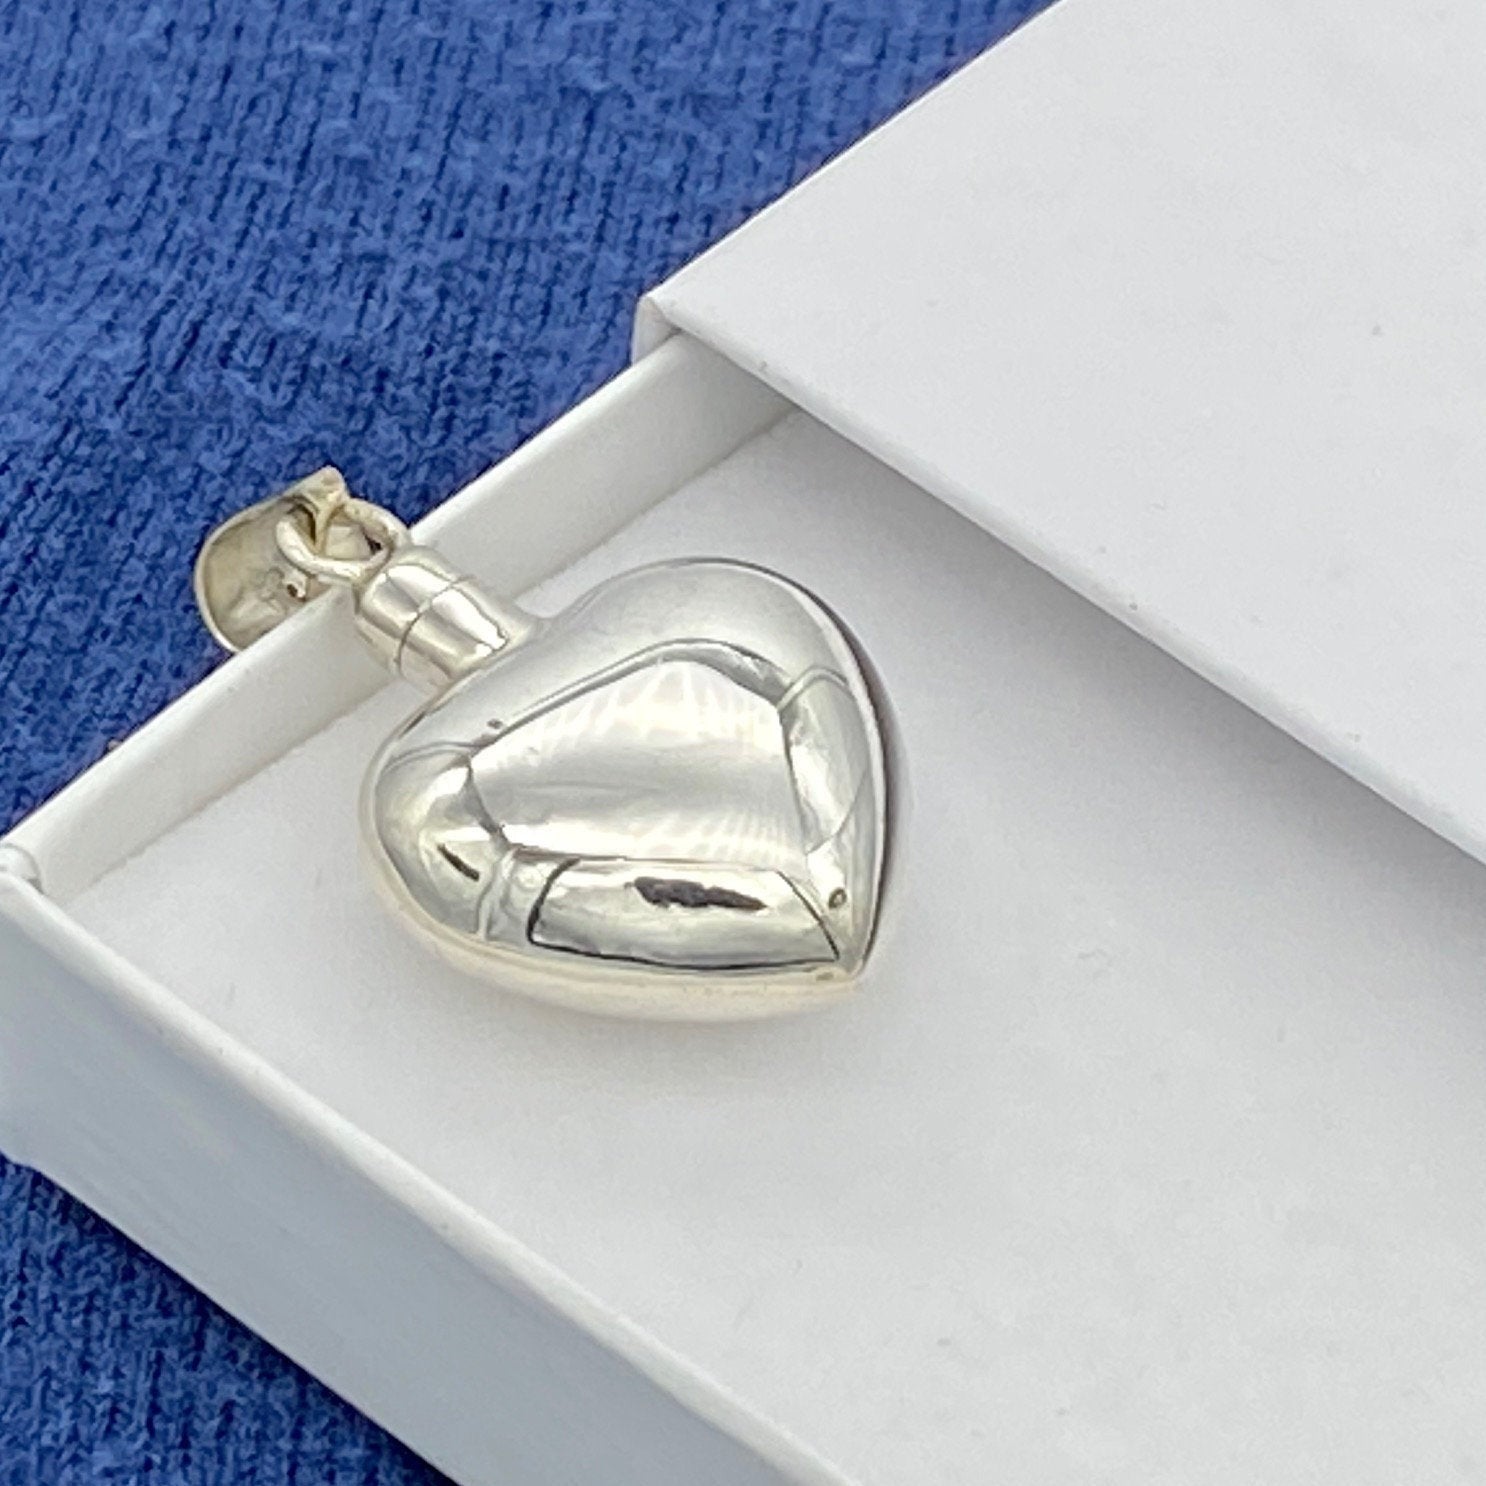 Heart Shape Silver Urn Ashes Pendant, Cremation Urn Necklace for Holding Ashes, Urn for Ashes of Long Lost Loved One, Urn to Remember Dog